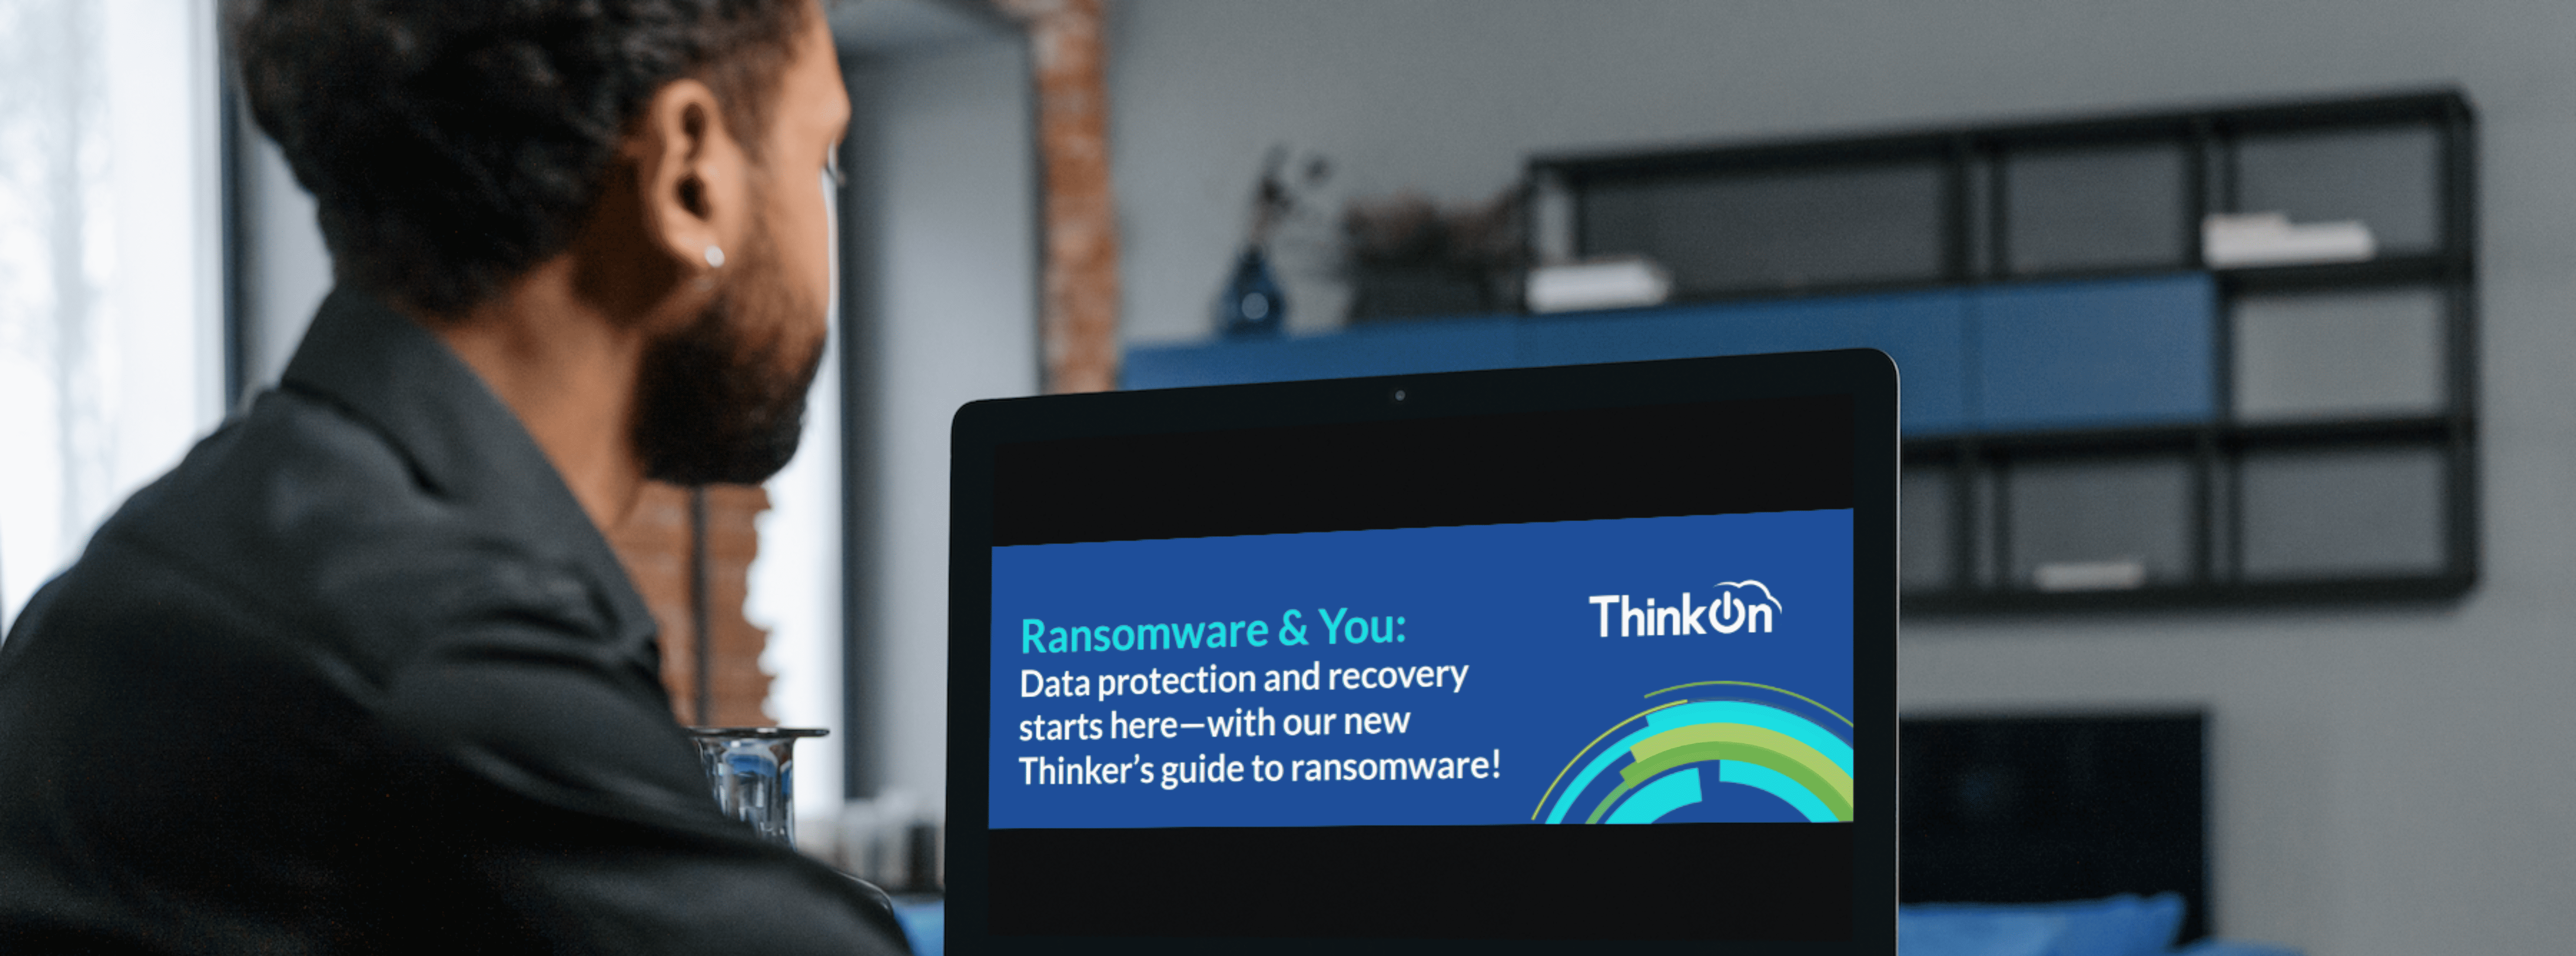 Thinker's guide to ransomware banner